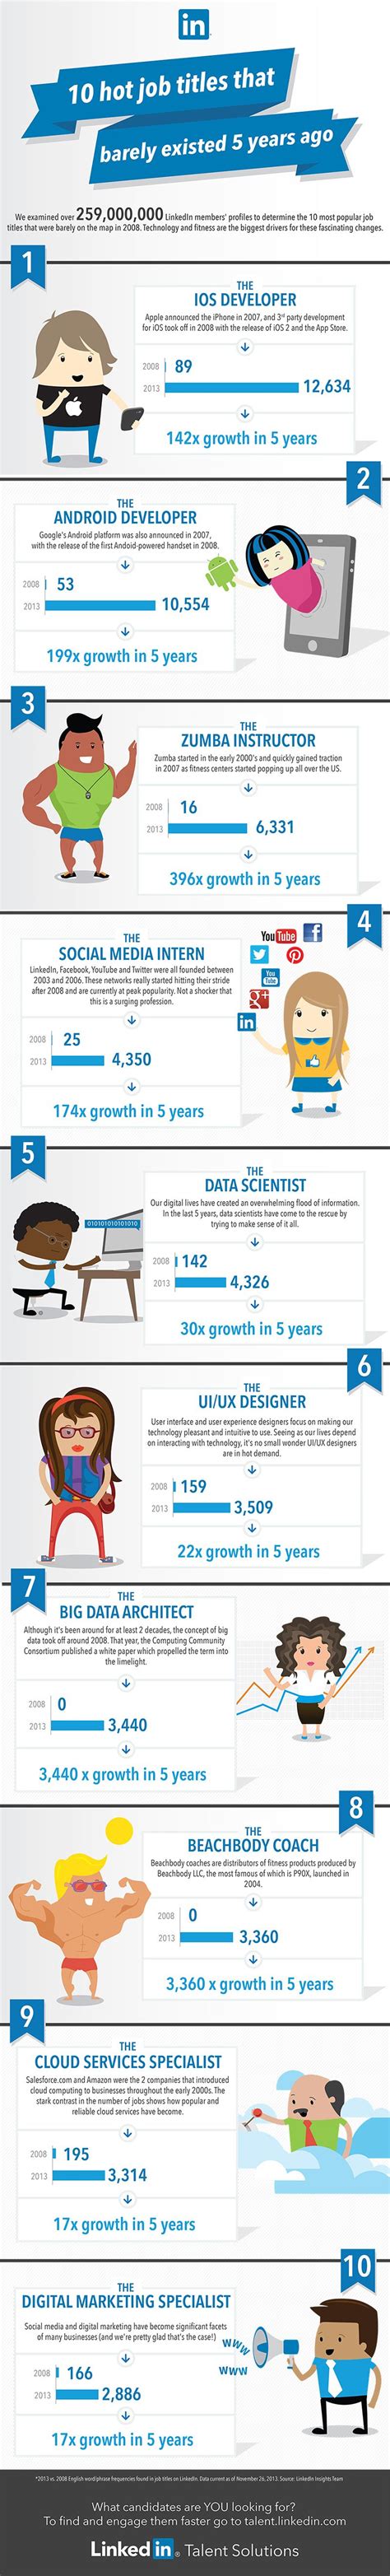 Top 10 Job Titles That Didnt Exist 5 Years Ago Infographic Social